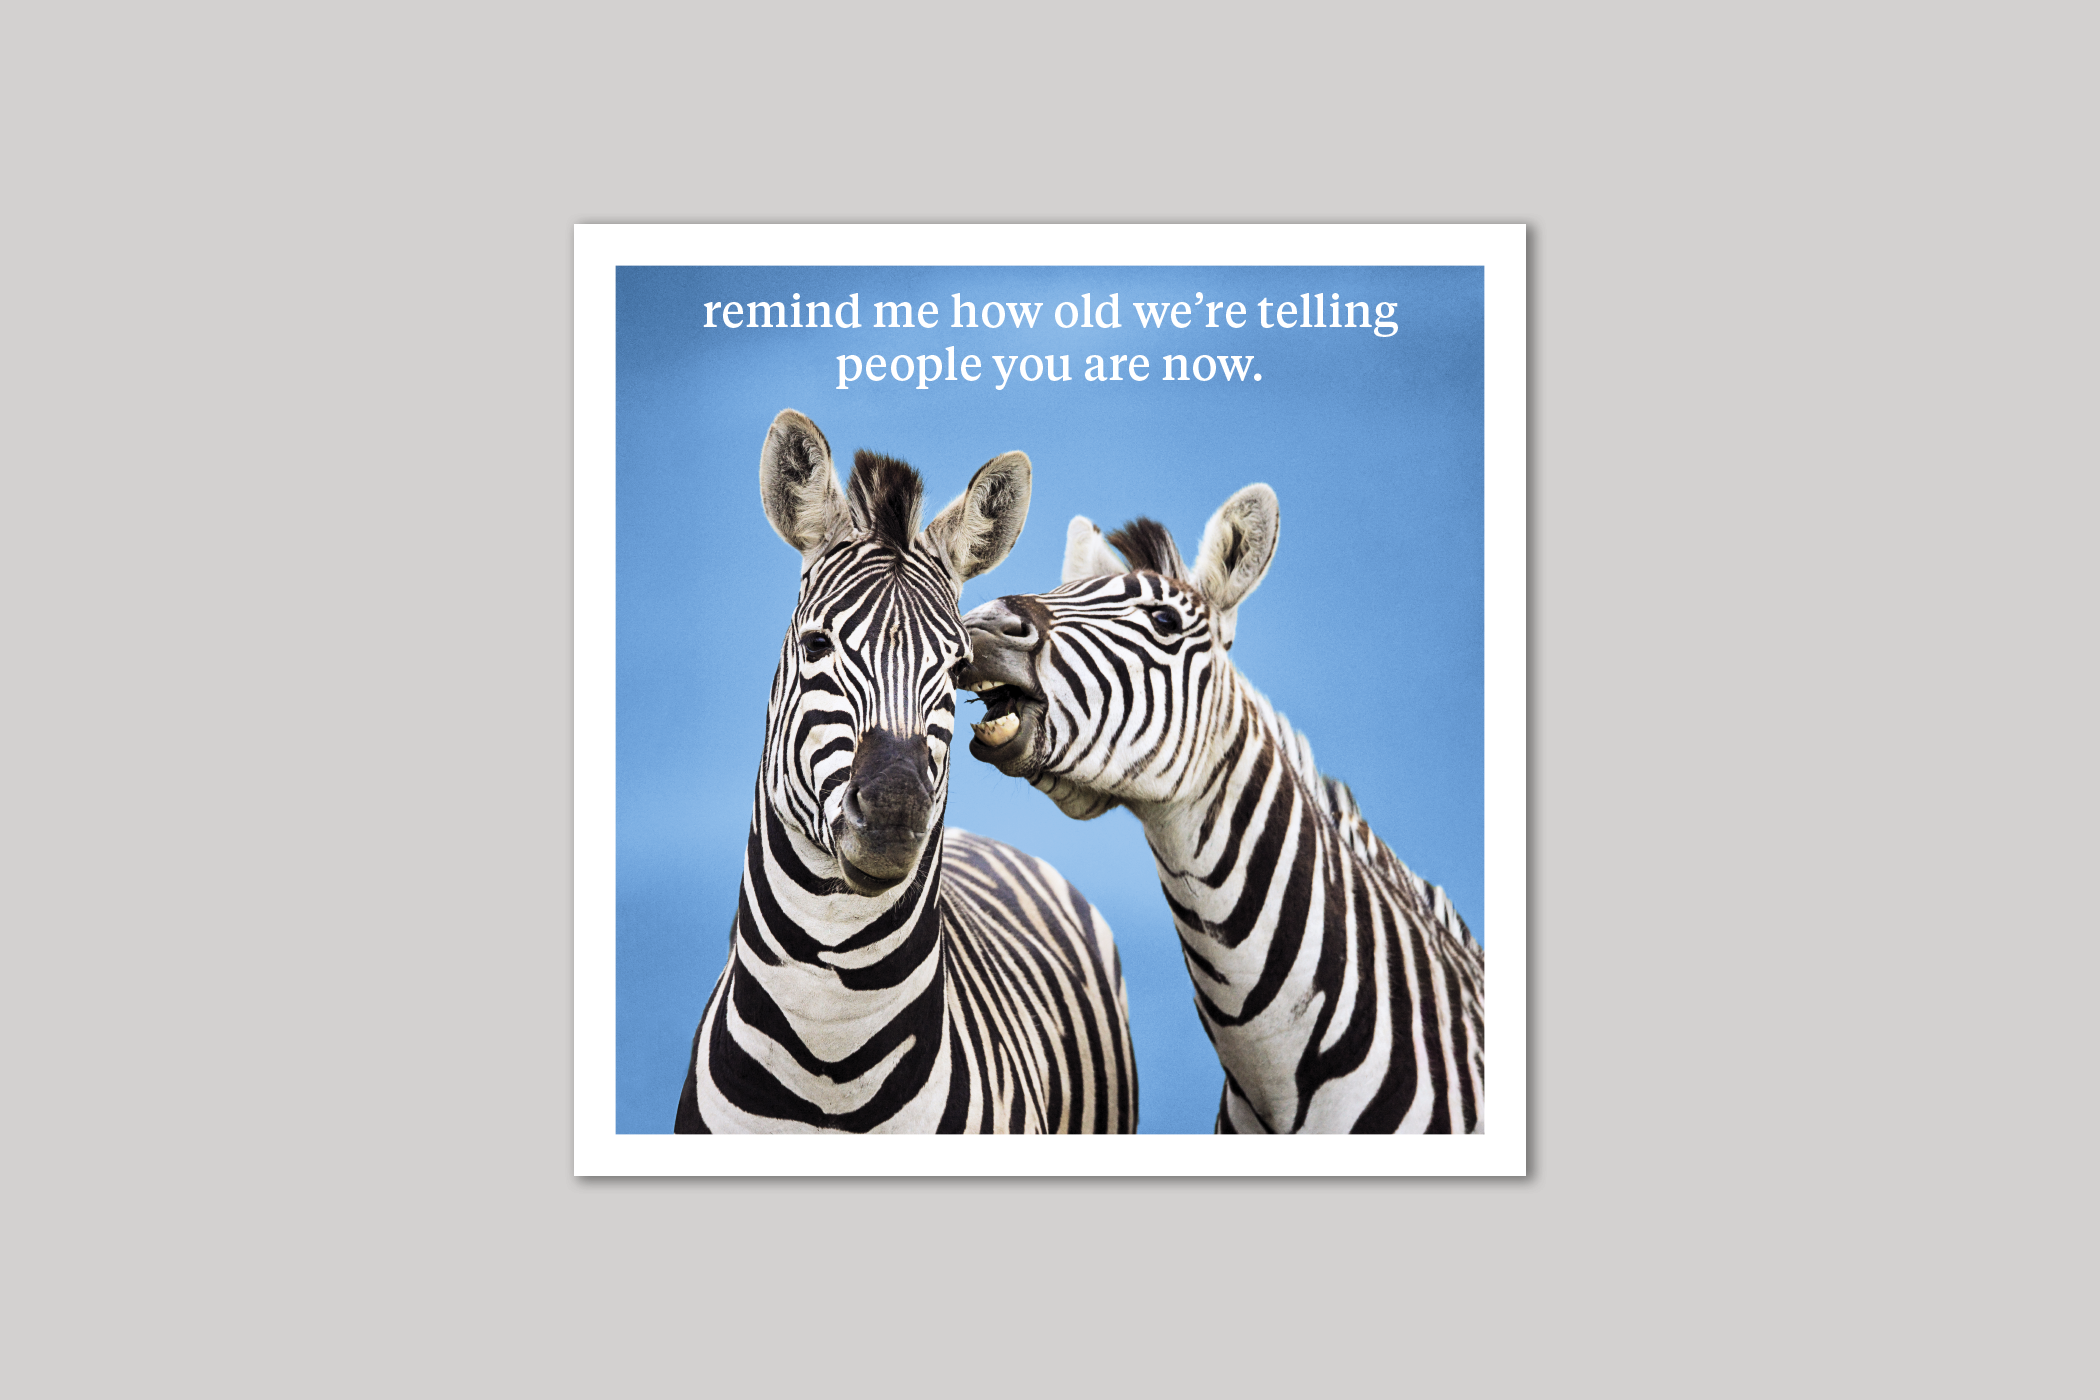 Remind Me quirky animal portrait from Curious World range of greeting cards by Icon.